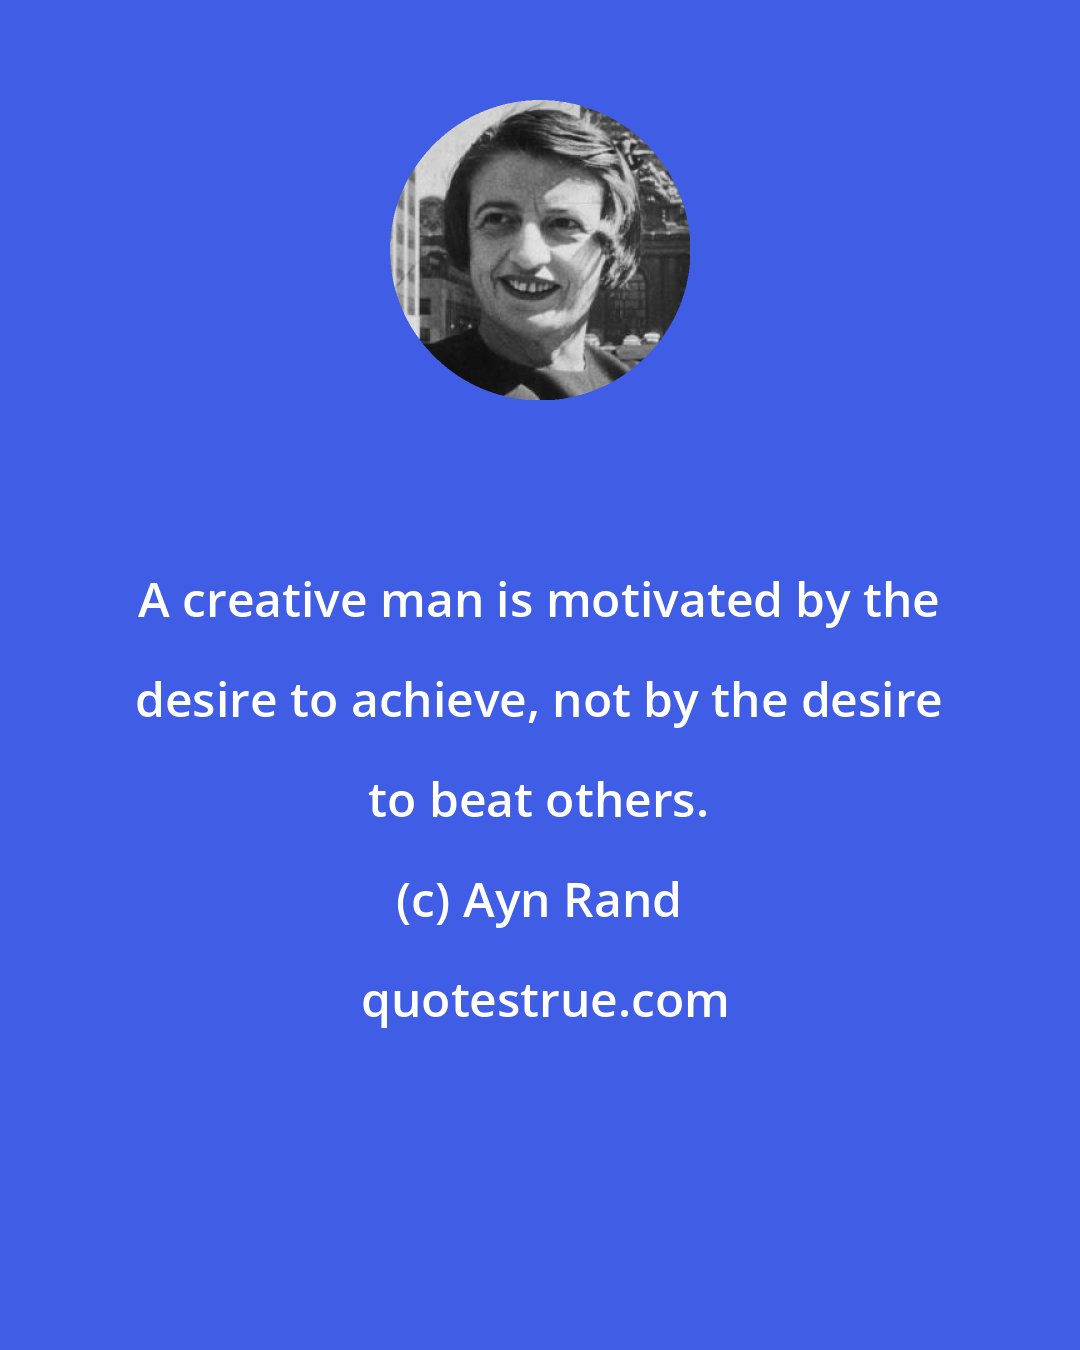 Ayn Rand: A creative man is motivated by the desire to achieve, not by the desire to beat others.